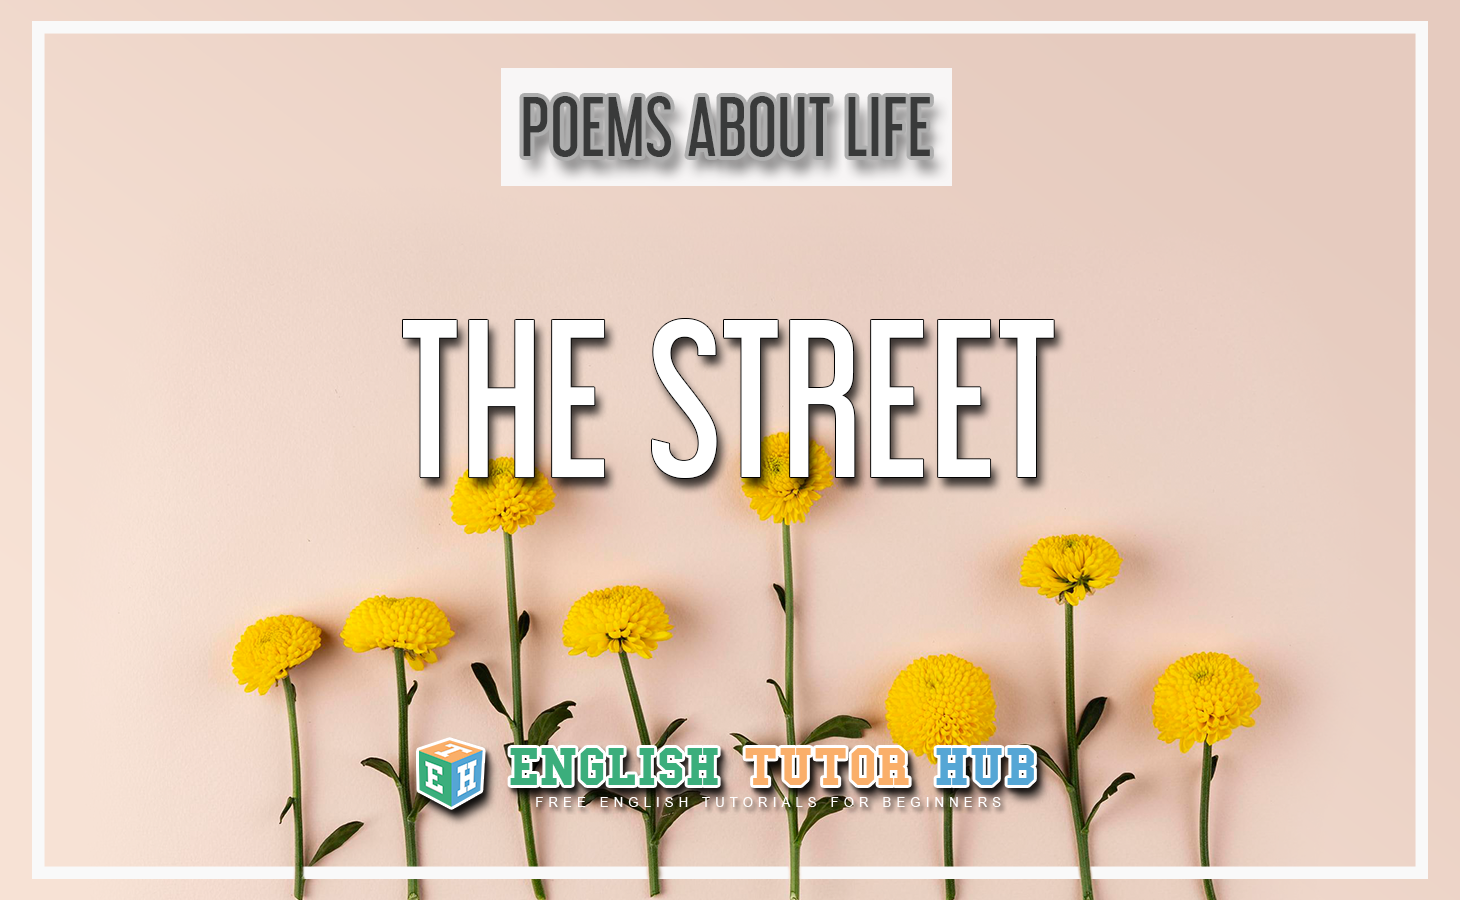 Poems about life - the street